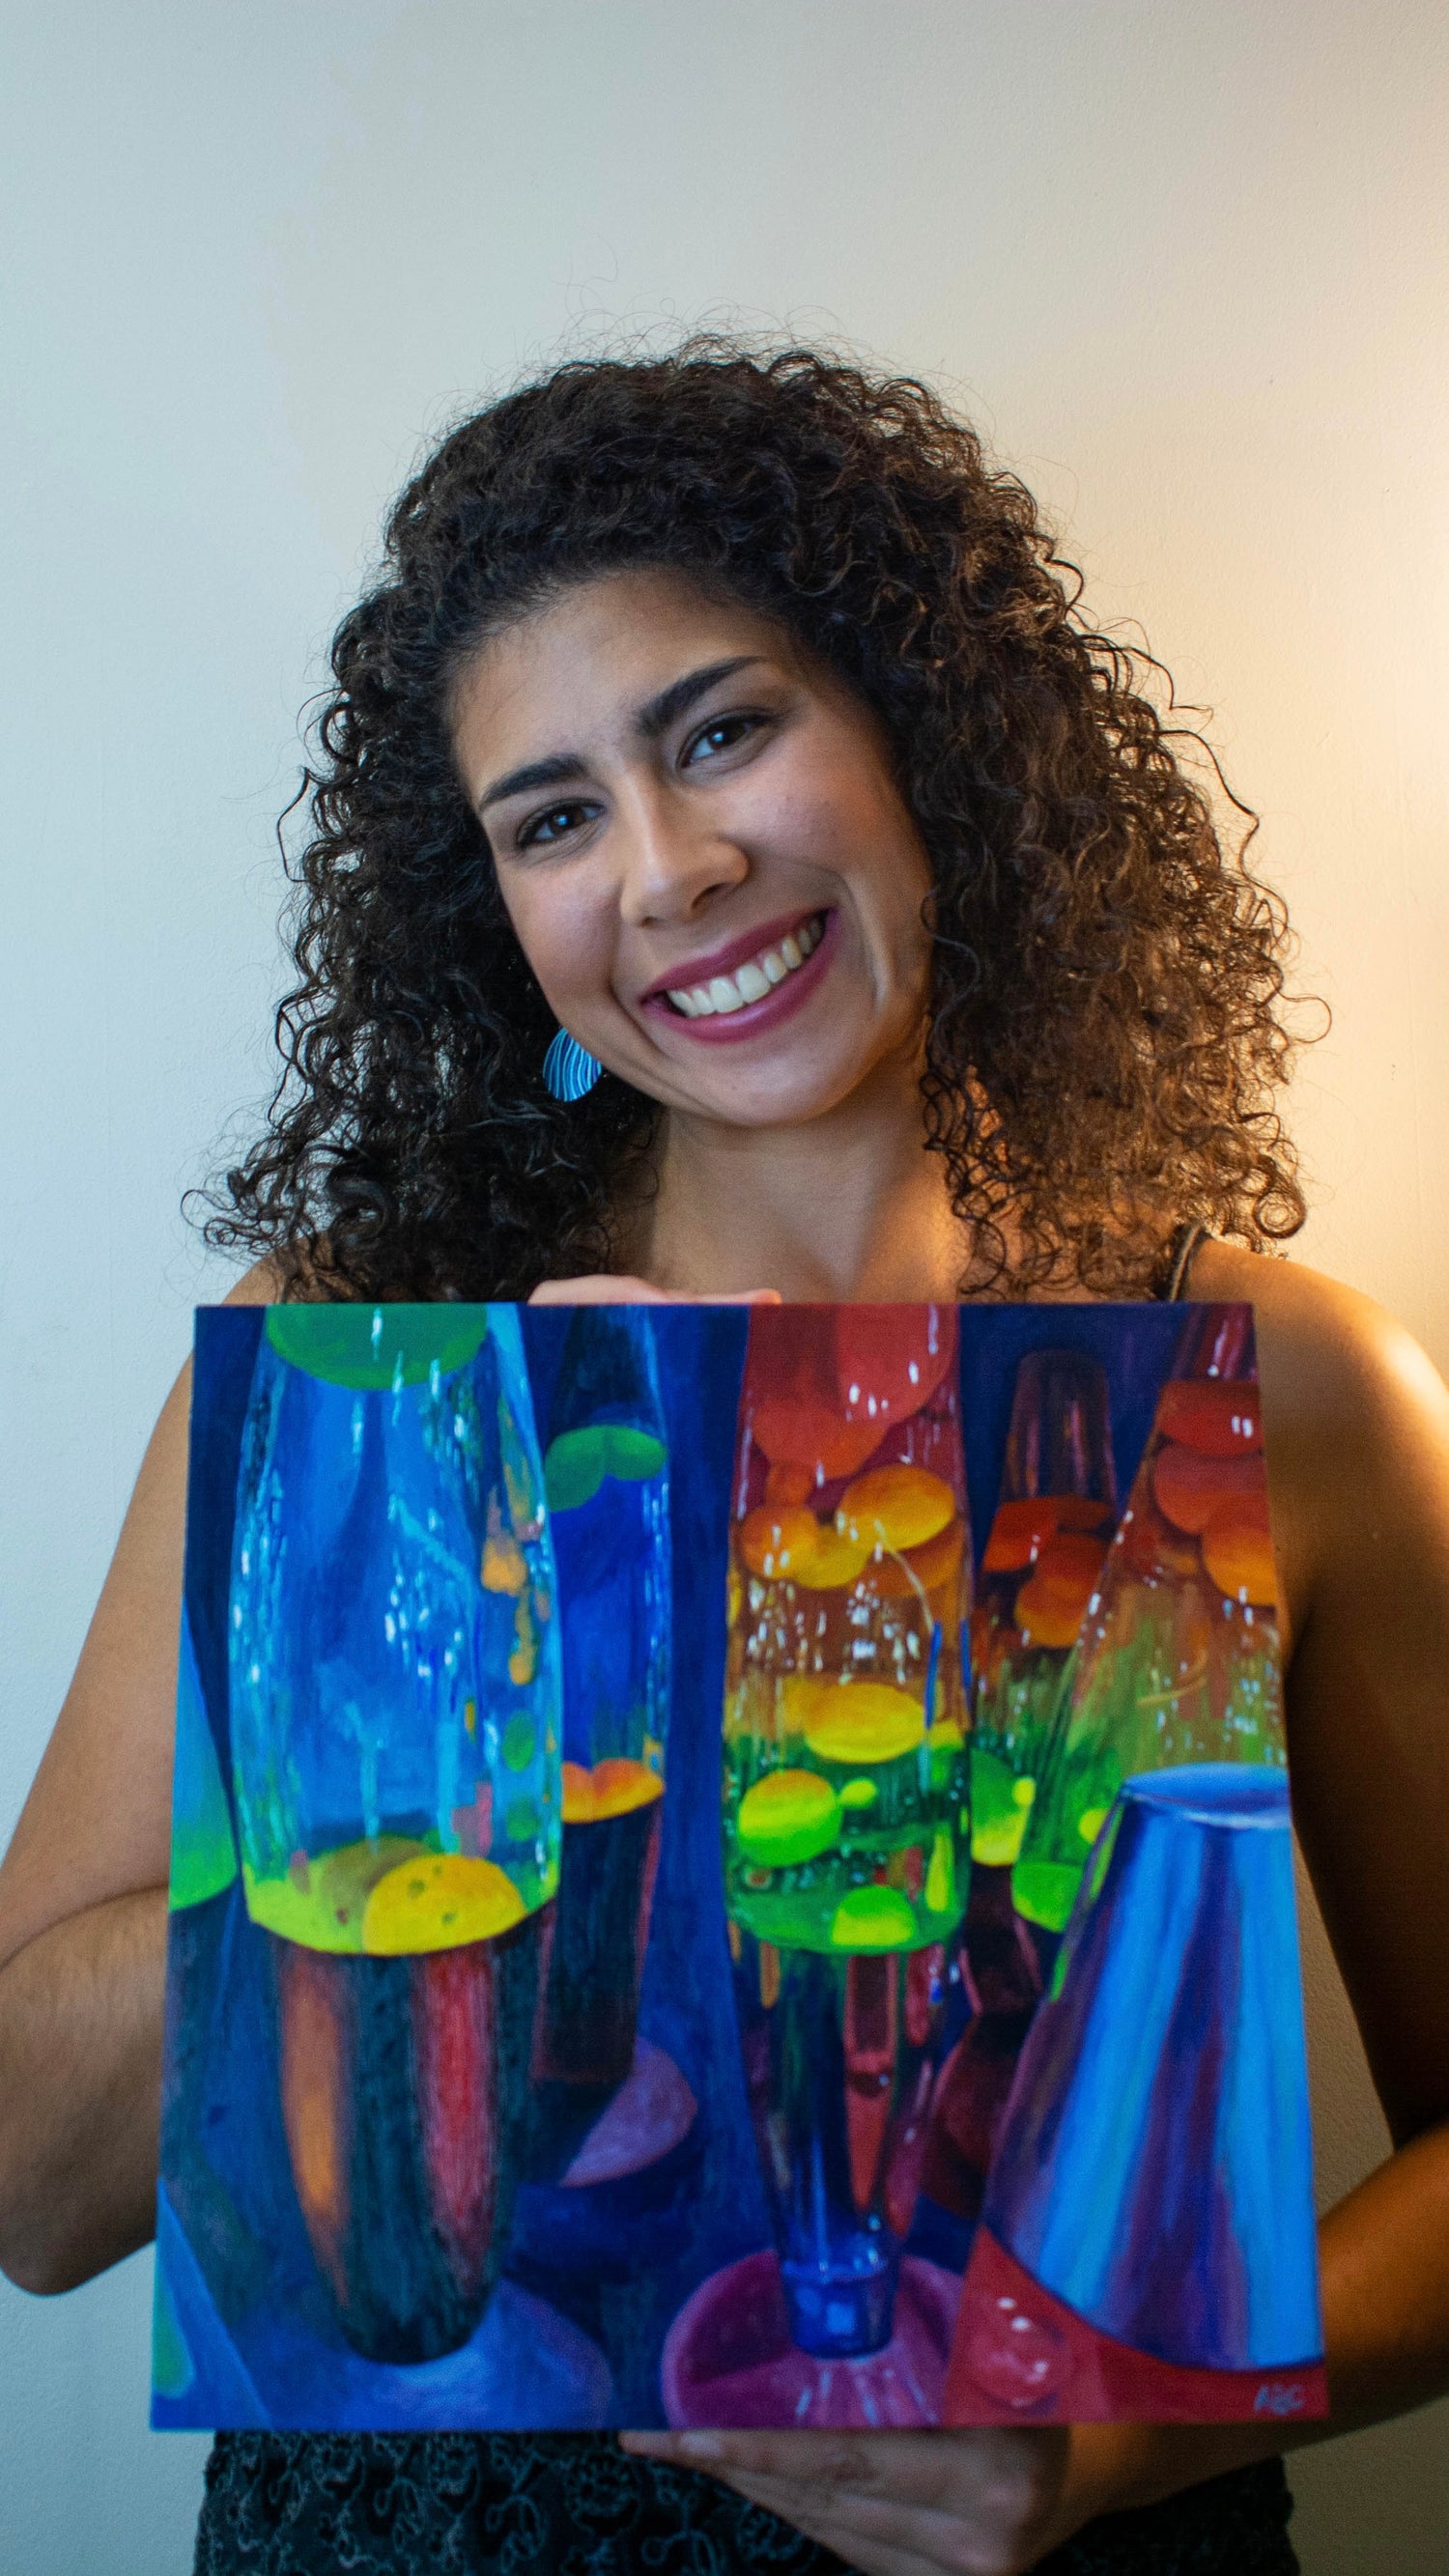 Artist holding lava lamps painting